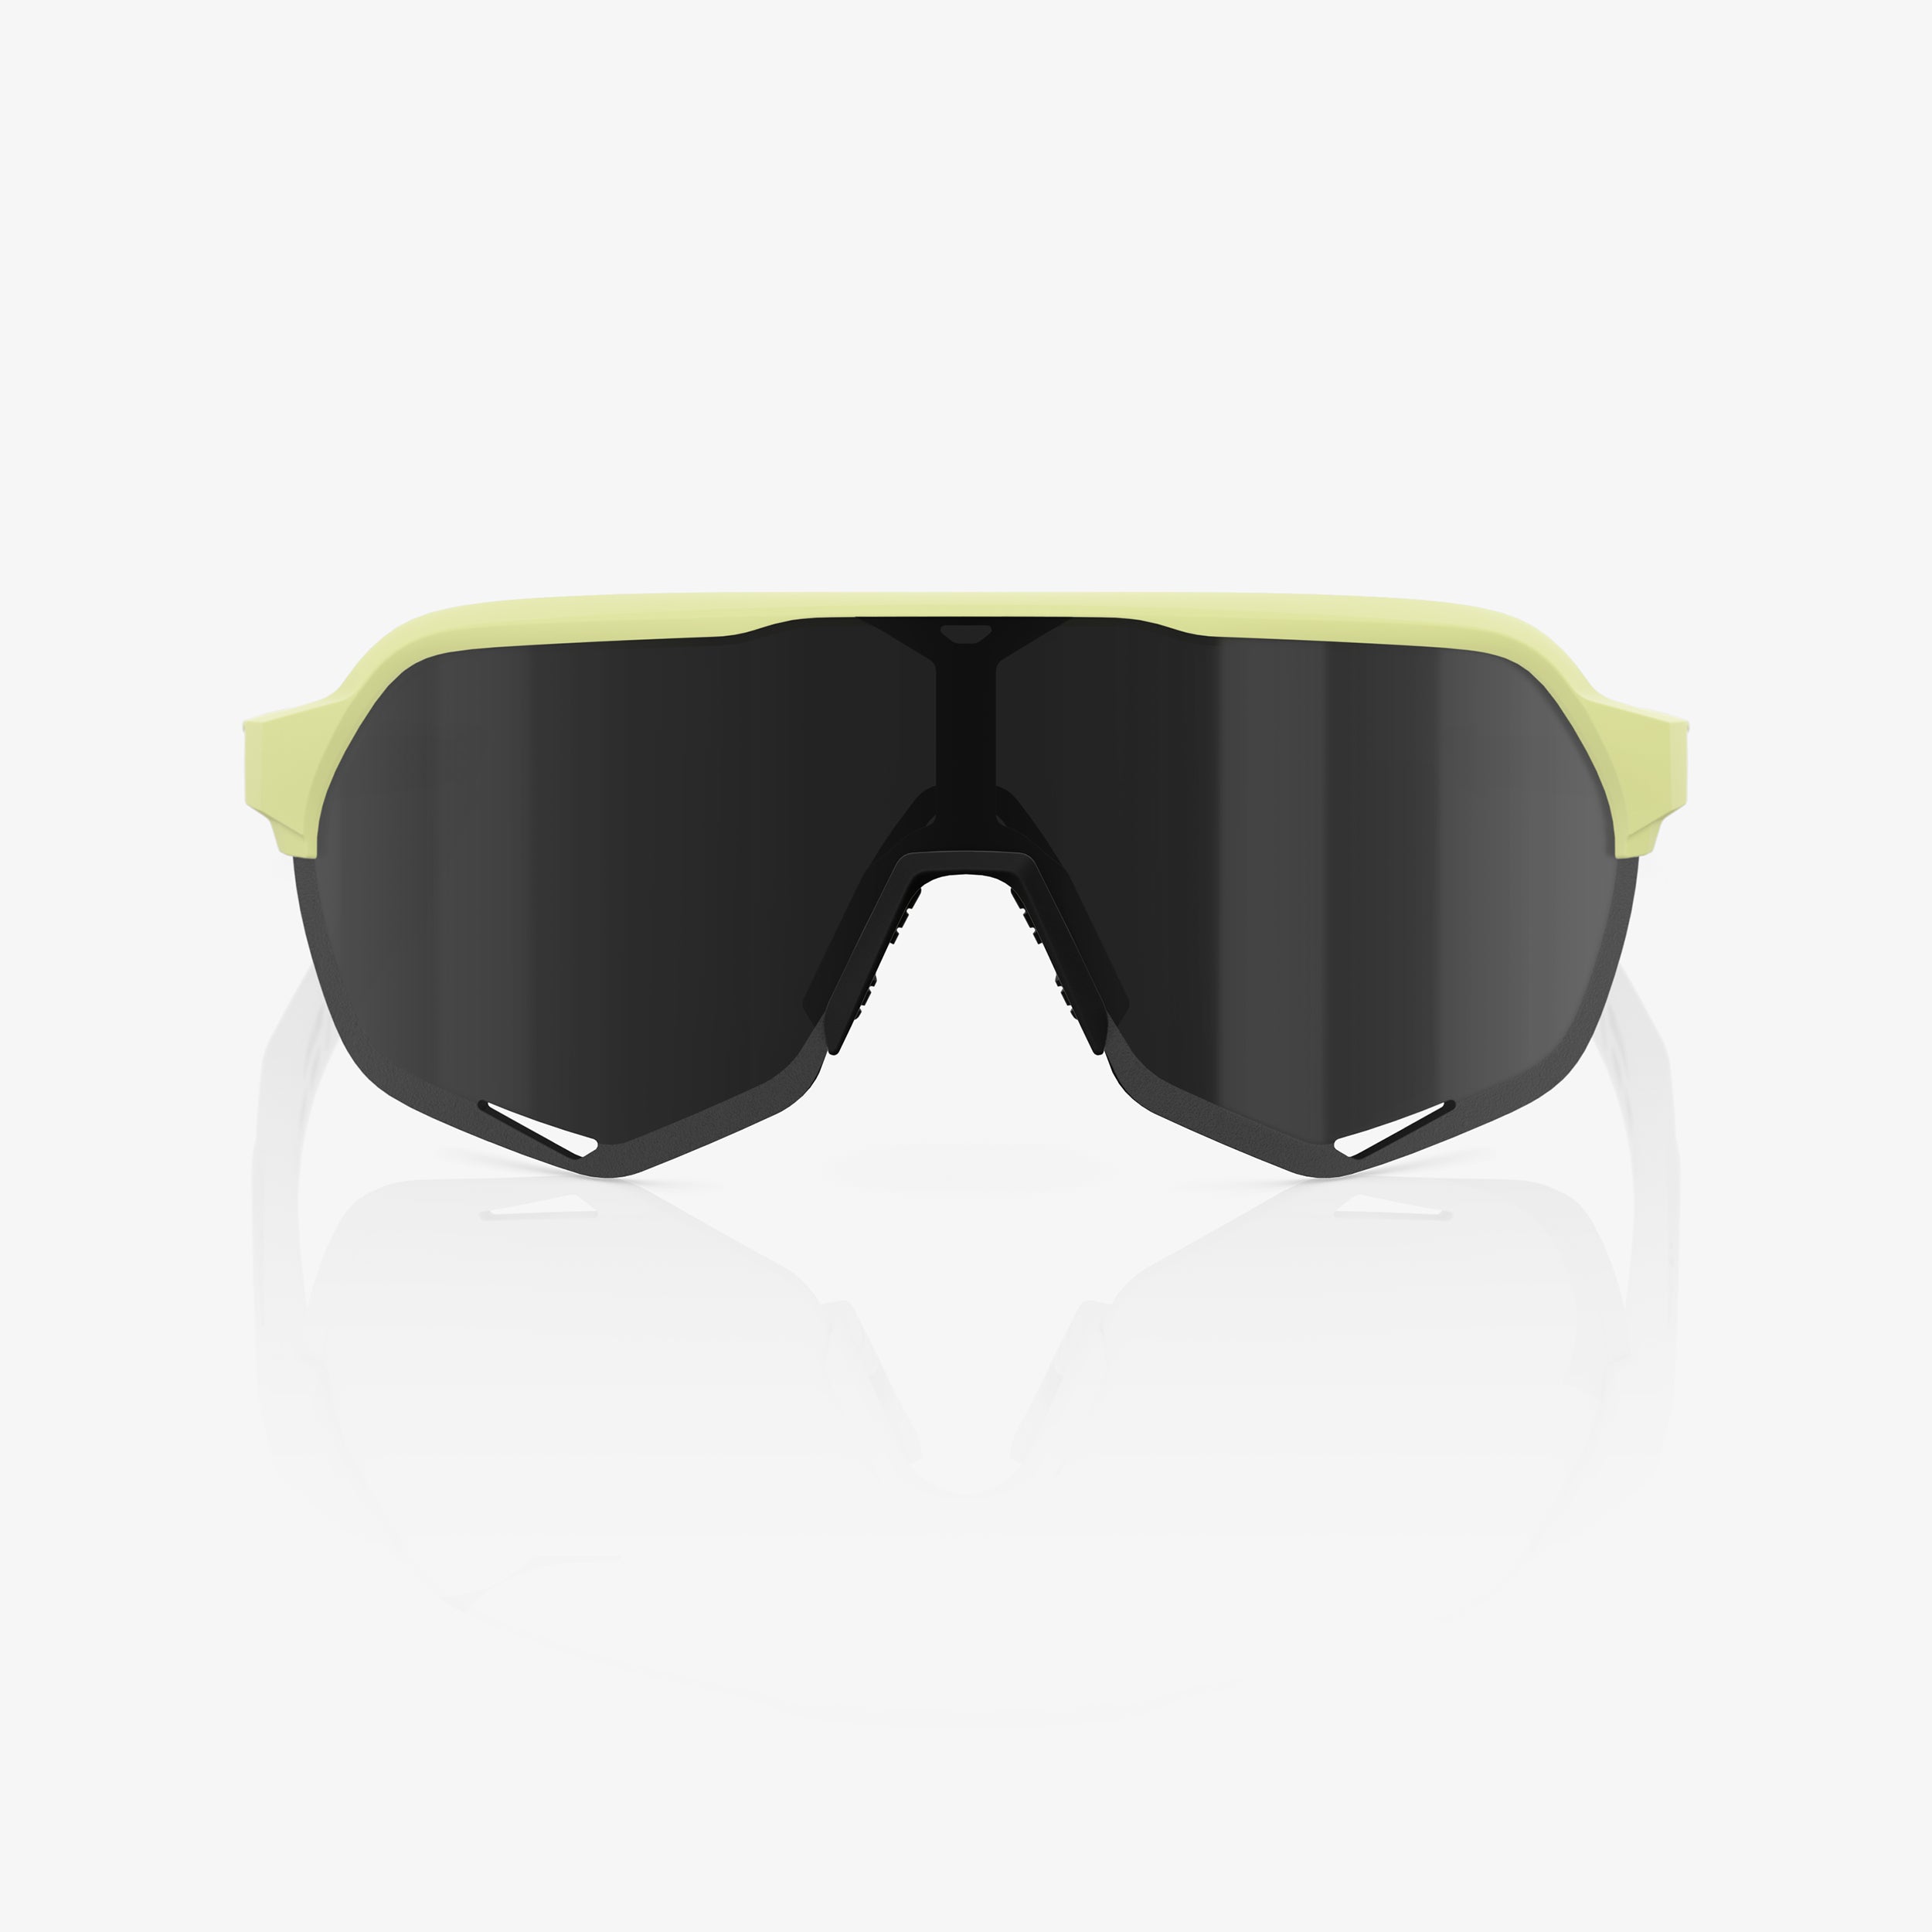 S2® Soft Tact Glow - Black Mirror Lens - Secondary